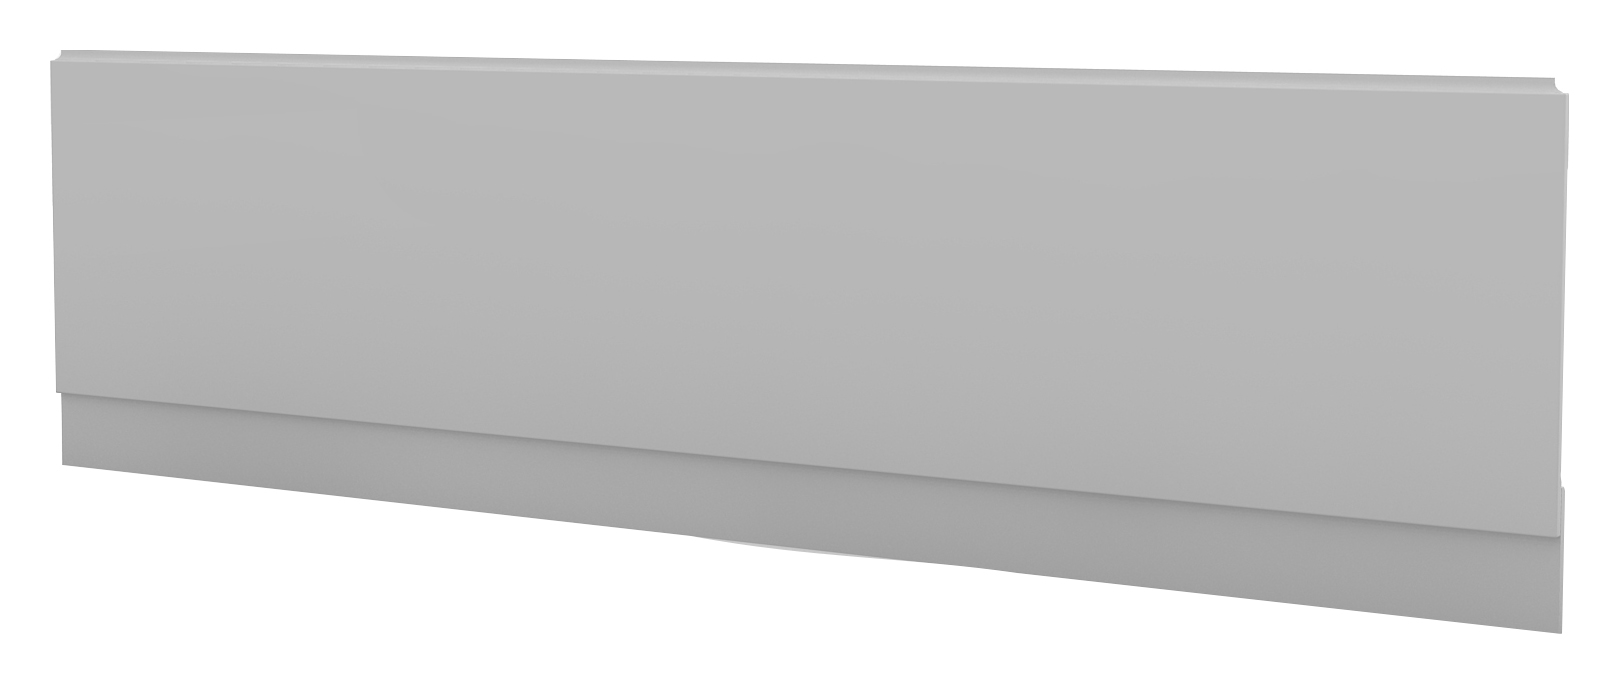 Image of Duarti By Calypso 1700mm Bath Front Panel with Plinth - White Varnish